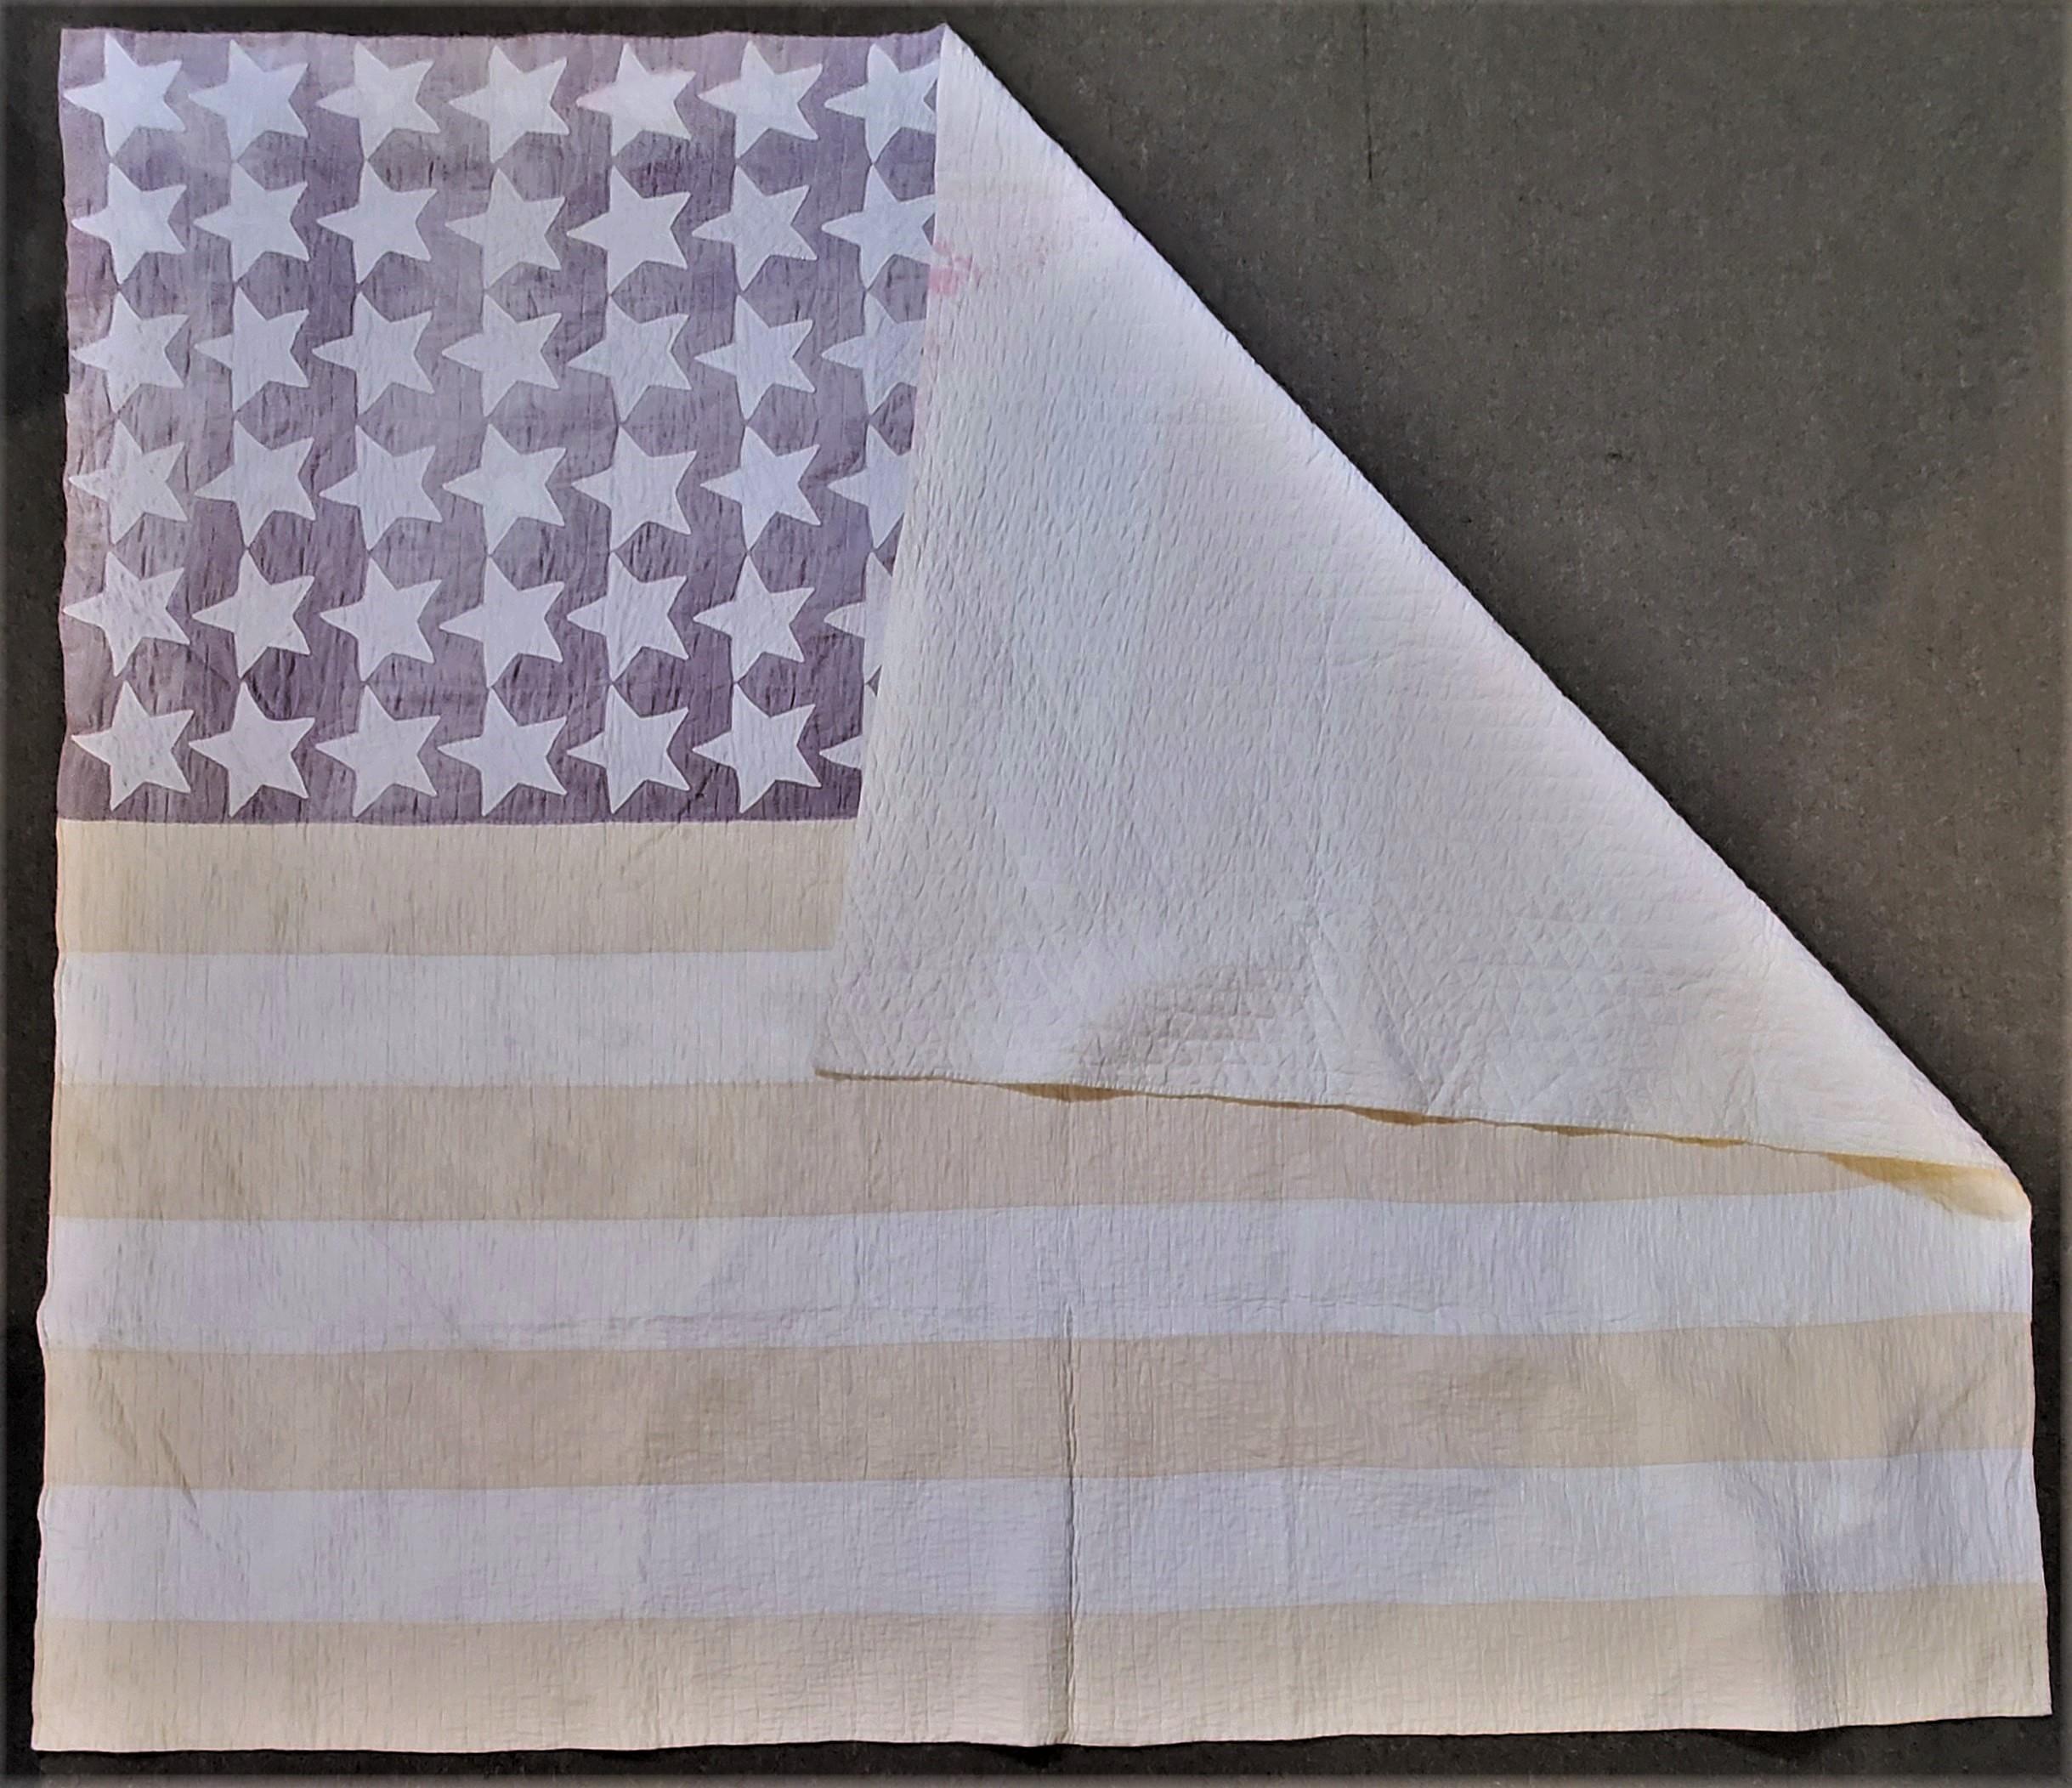 This hand sewn 48 stars flag quilt is in good condition with minor tiny little repairs and evenly faded. It is such a great look for a ranch or cabin retreat. It is in a polished cotton fabric and has hand sewn stars. The stars have quilted stars